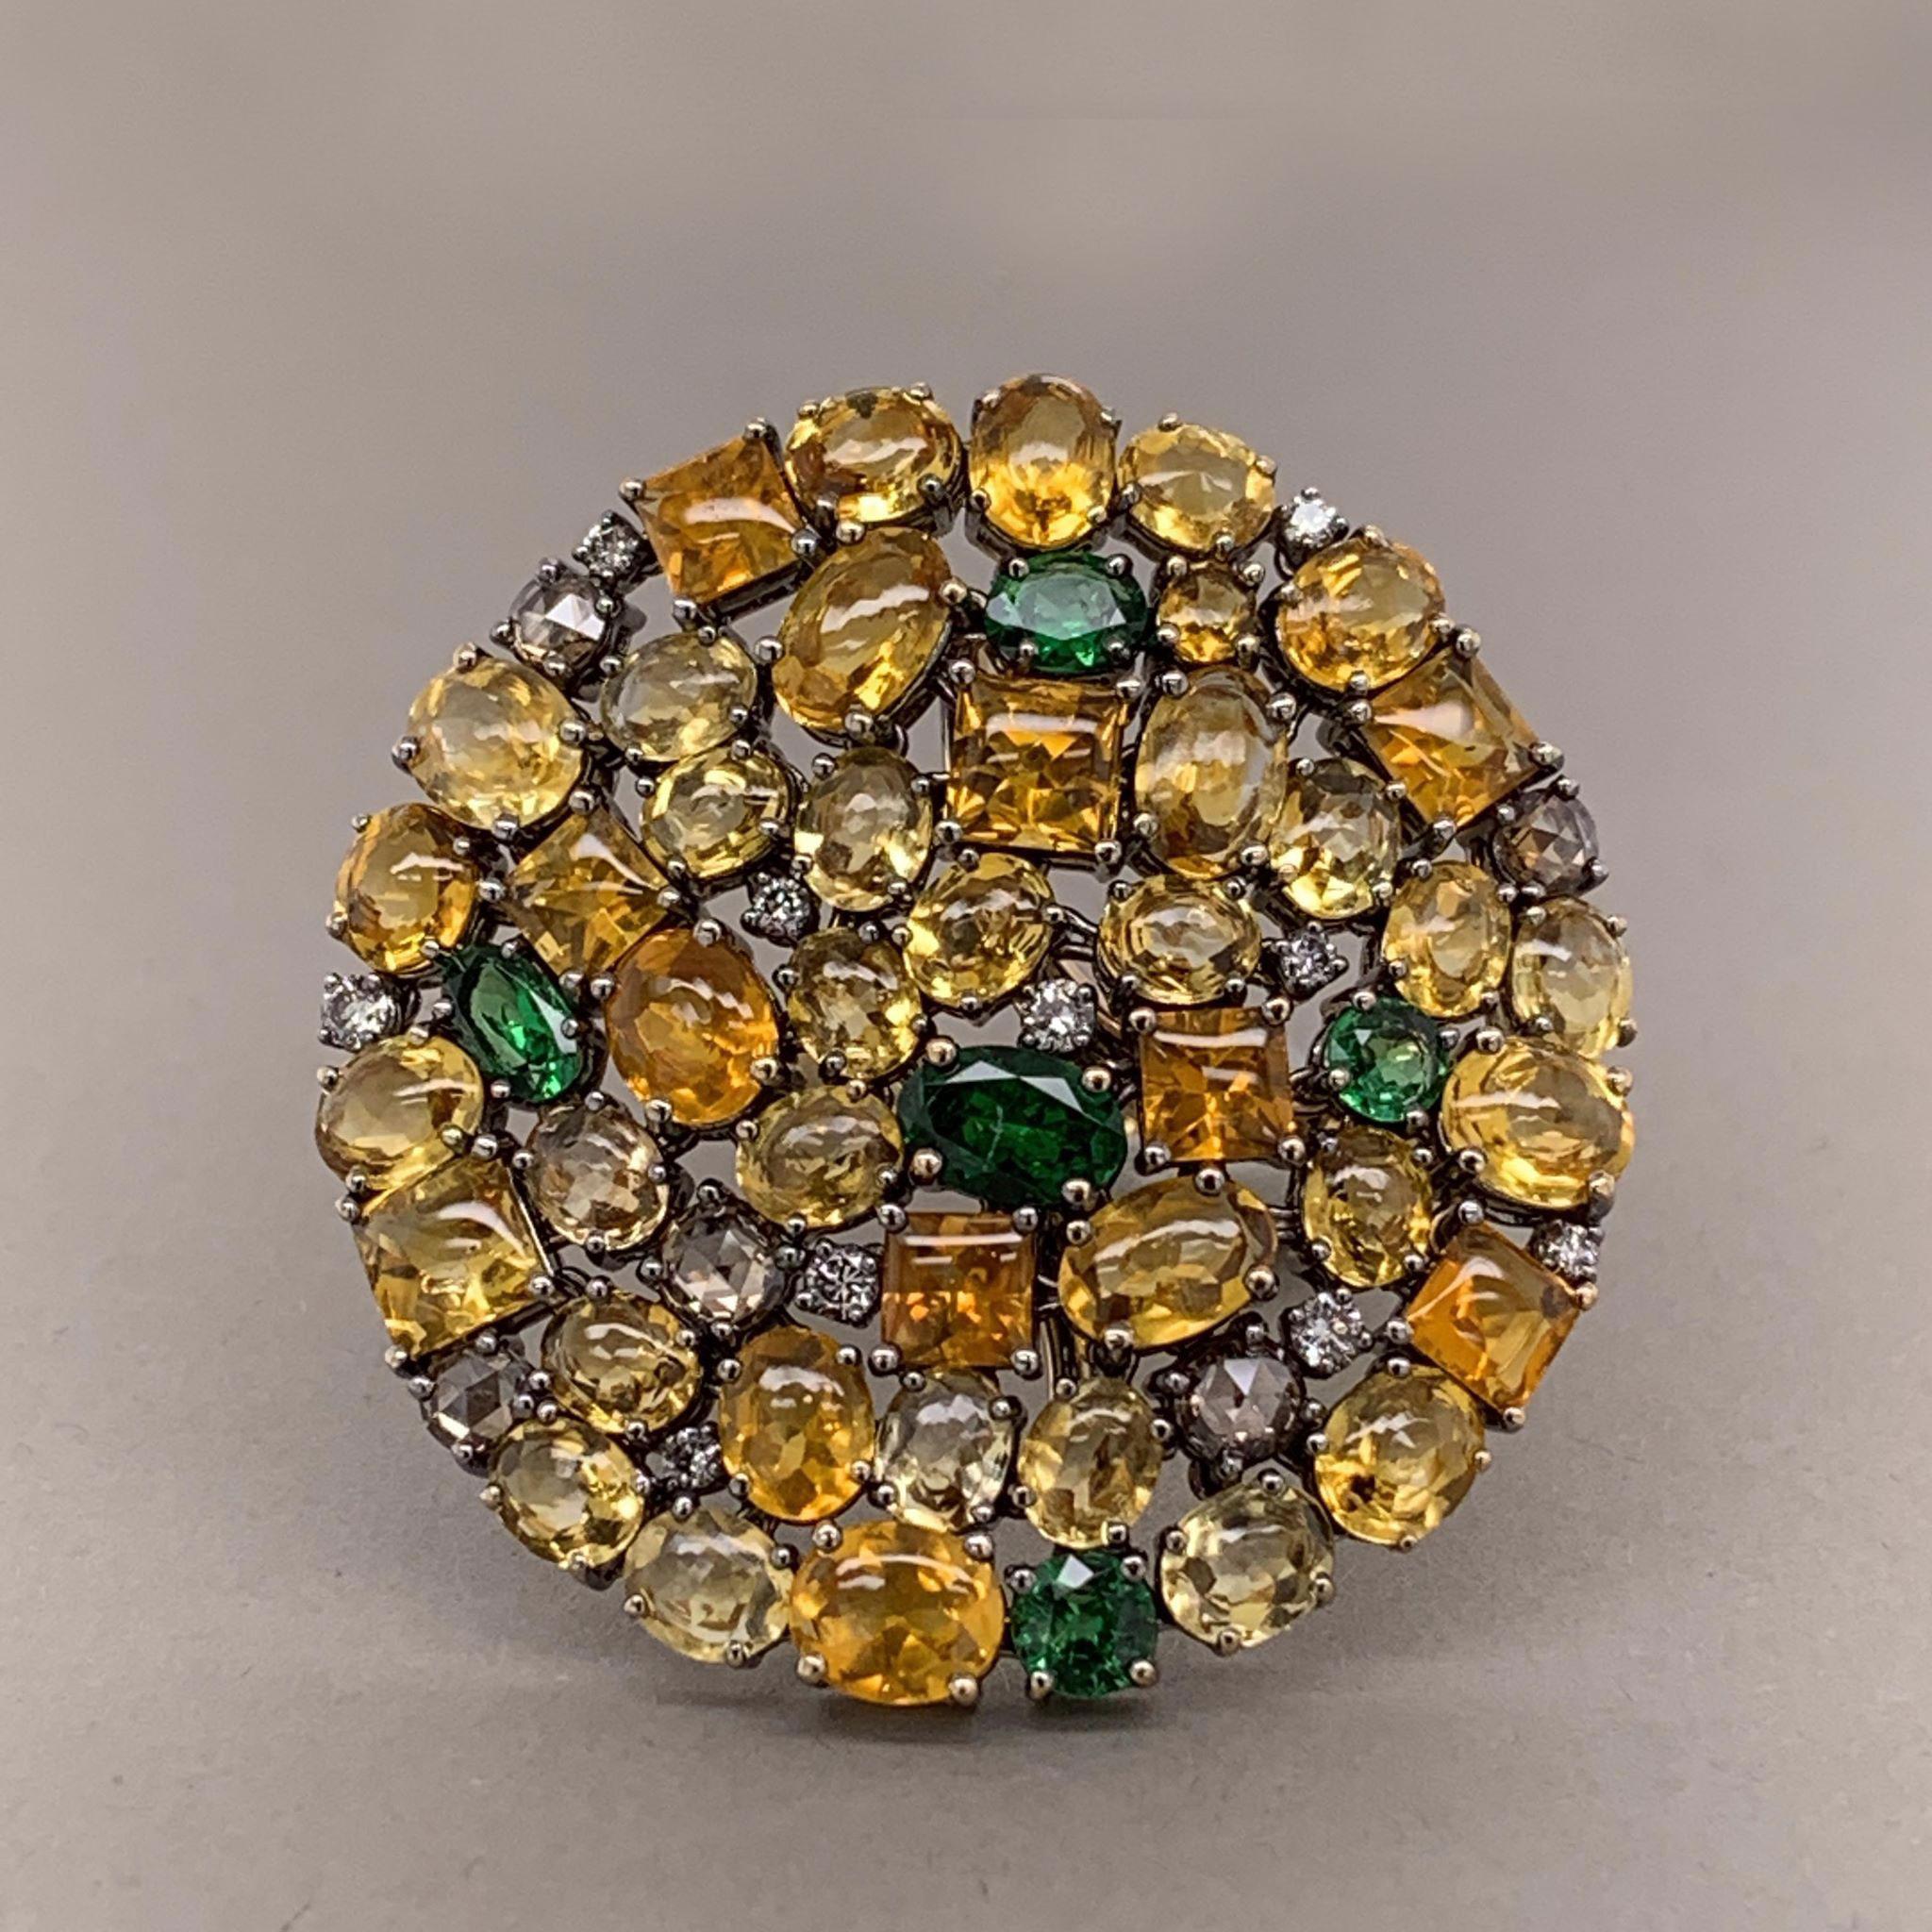 A special treat! This gemset ring features 19.63 carats of diamonds, tsavorite garnets, and orange/yellow sapphires. Each of the rings settings are connected with small hinges allowing the flat top to flex and move ever so slightly. Hand fabricated